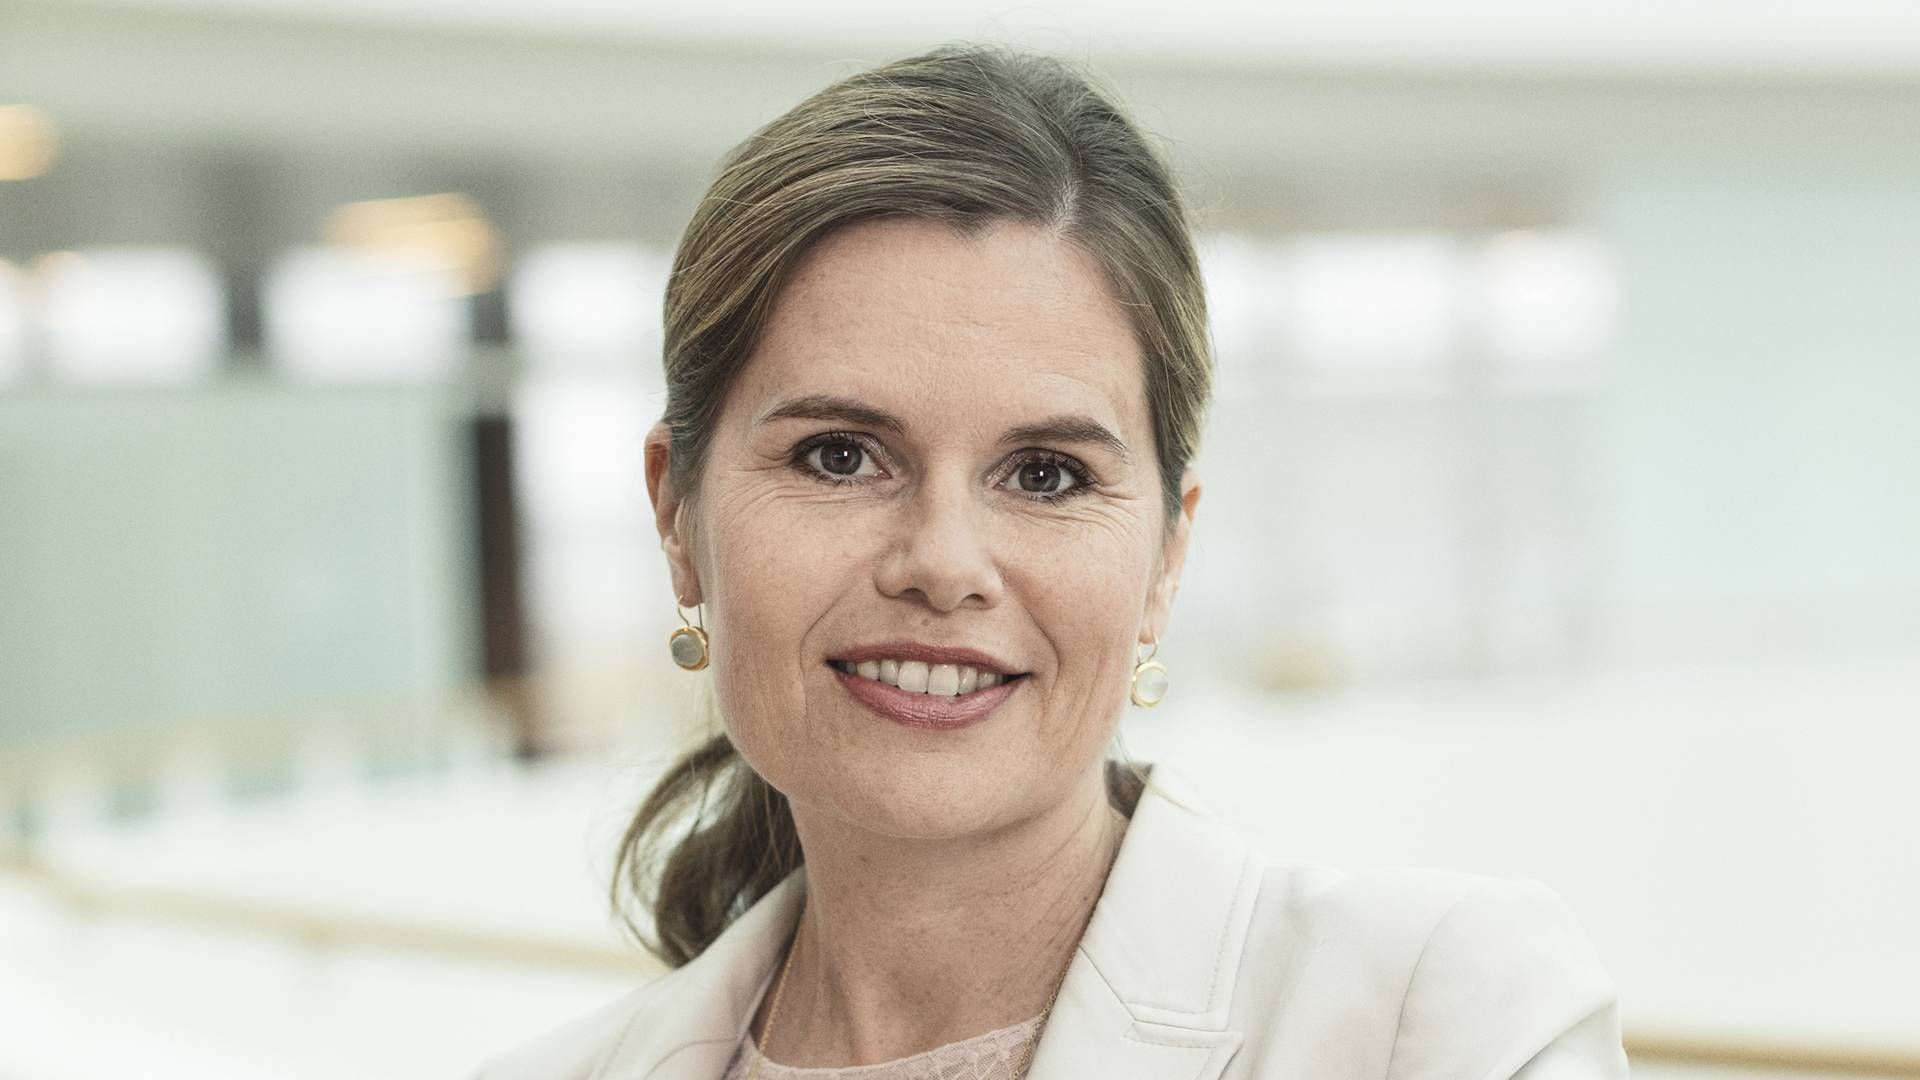 Executive Vice President for Commercial Strategy and Corporate Affairs Camilla Sylvest | Photo: Novo Nordisk / PR